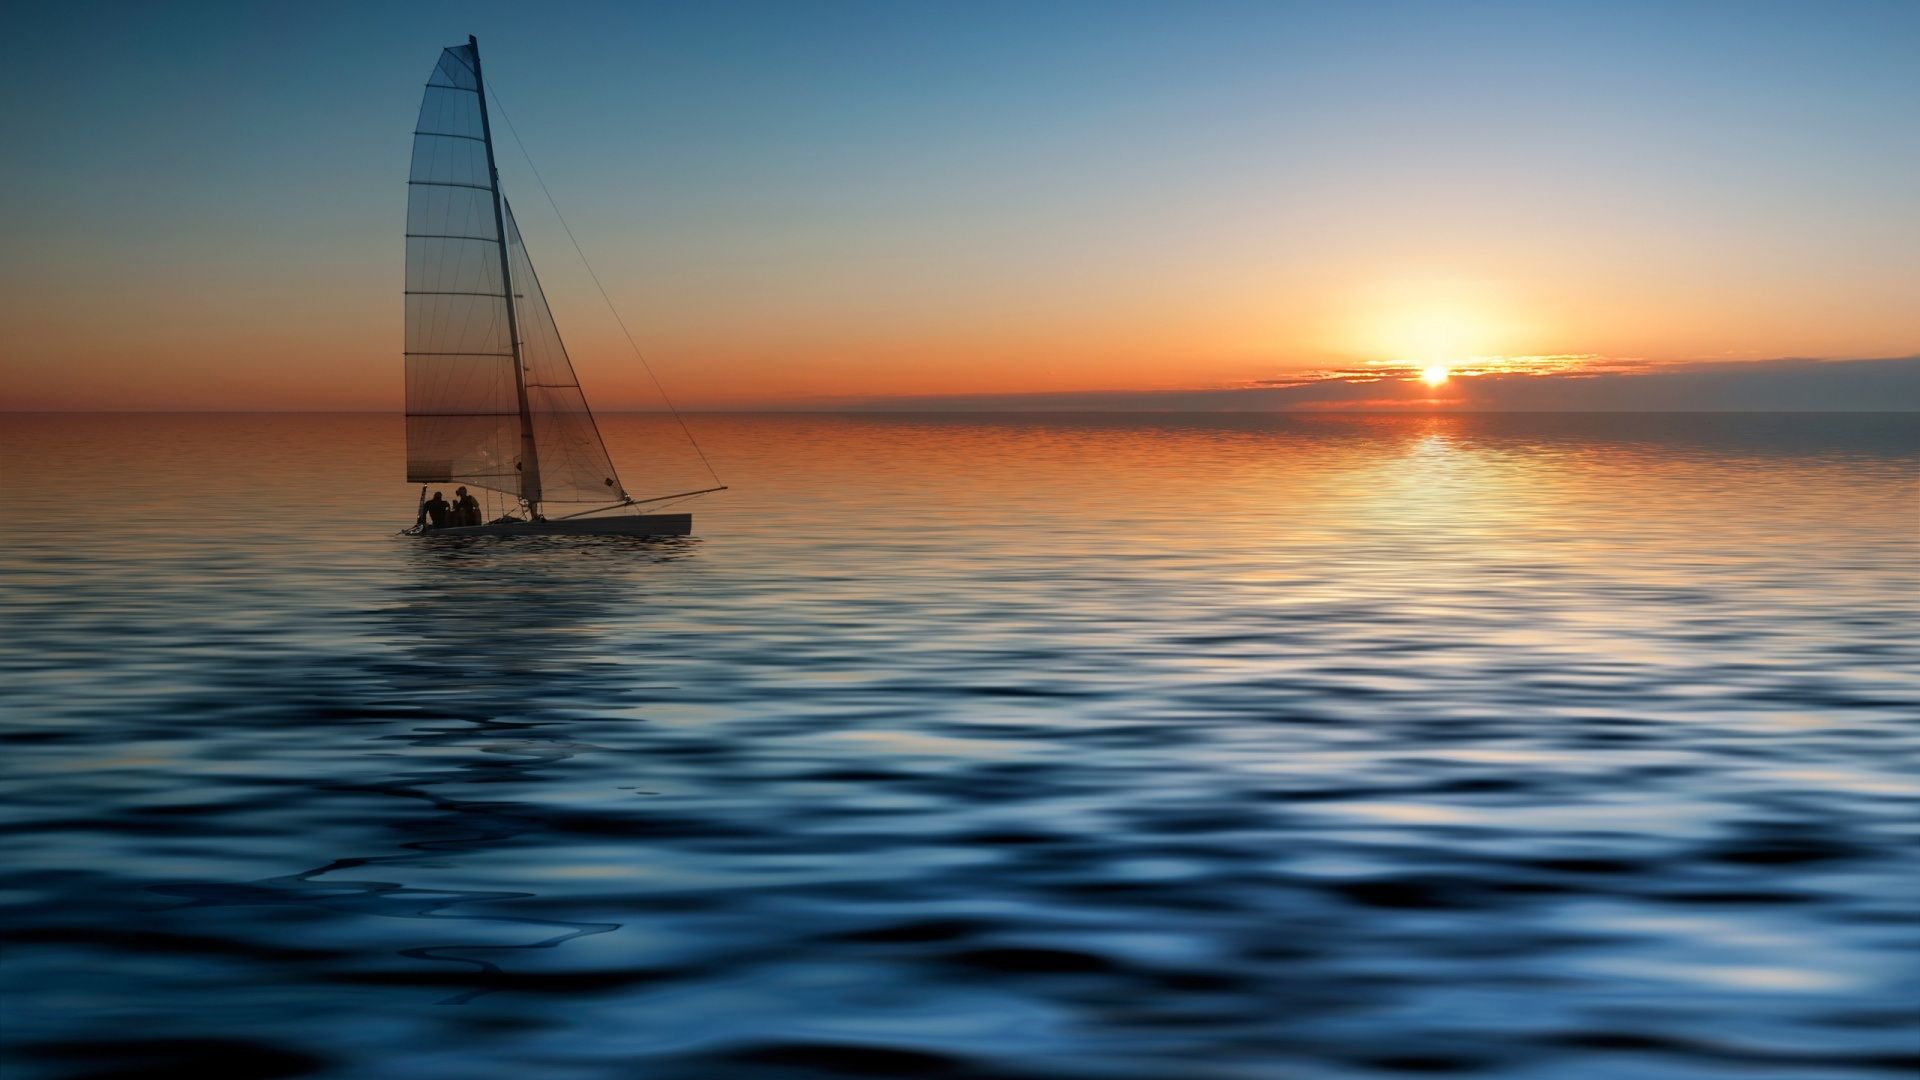 Pictures Of Sailboats On The Ocean Sunset Wallpaper Boat